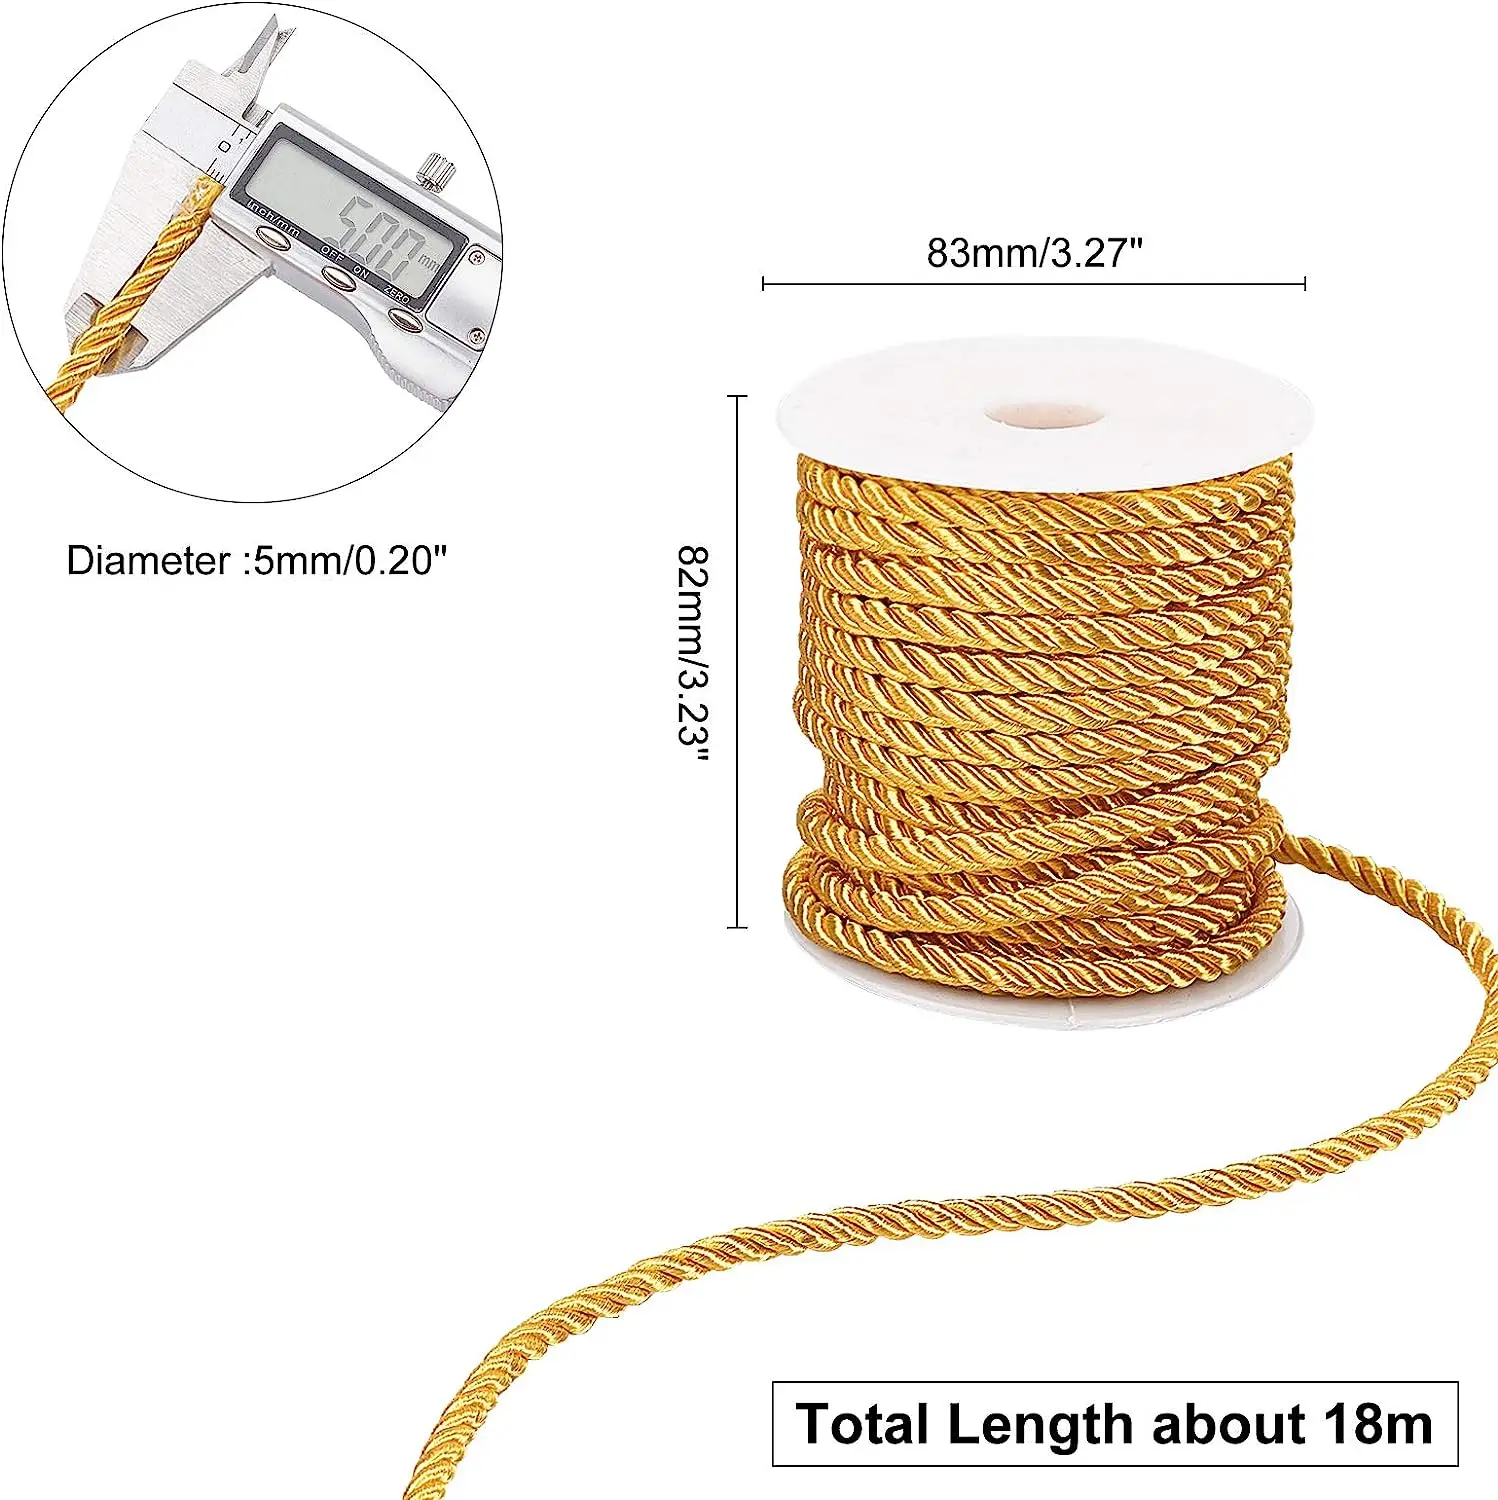 5MM Twisted Cord Rope Trim Craft Decorative Polyester Rope Handmade Cording for Sewing Crafts Upholstery Home Decor 5m